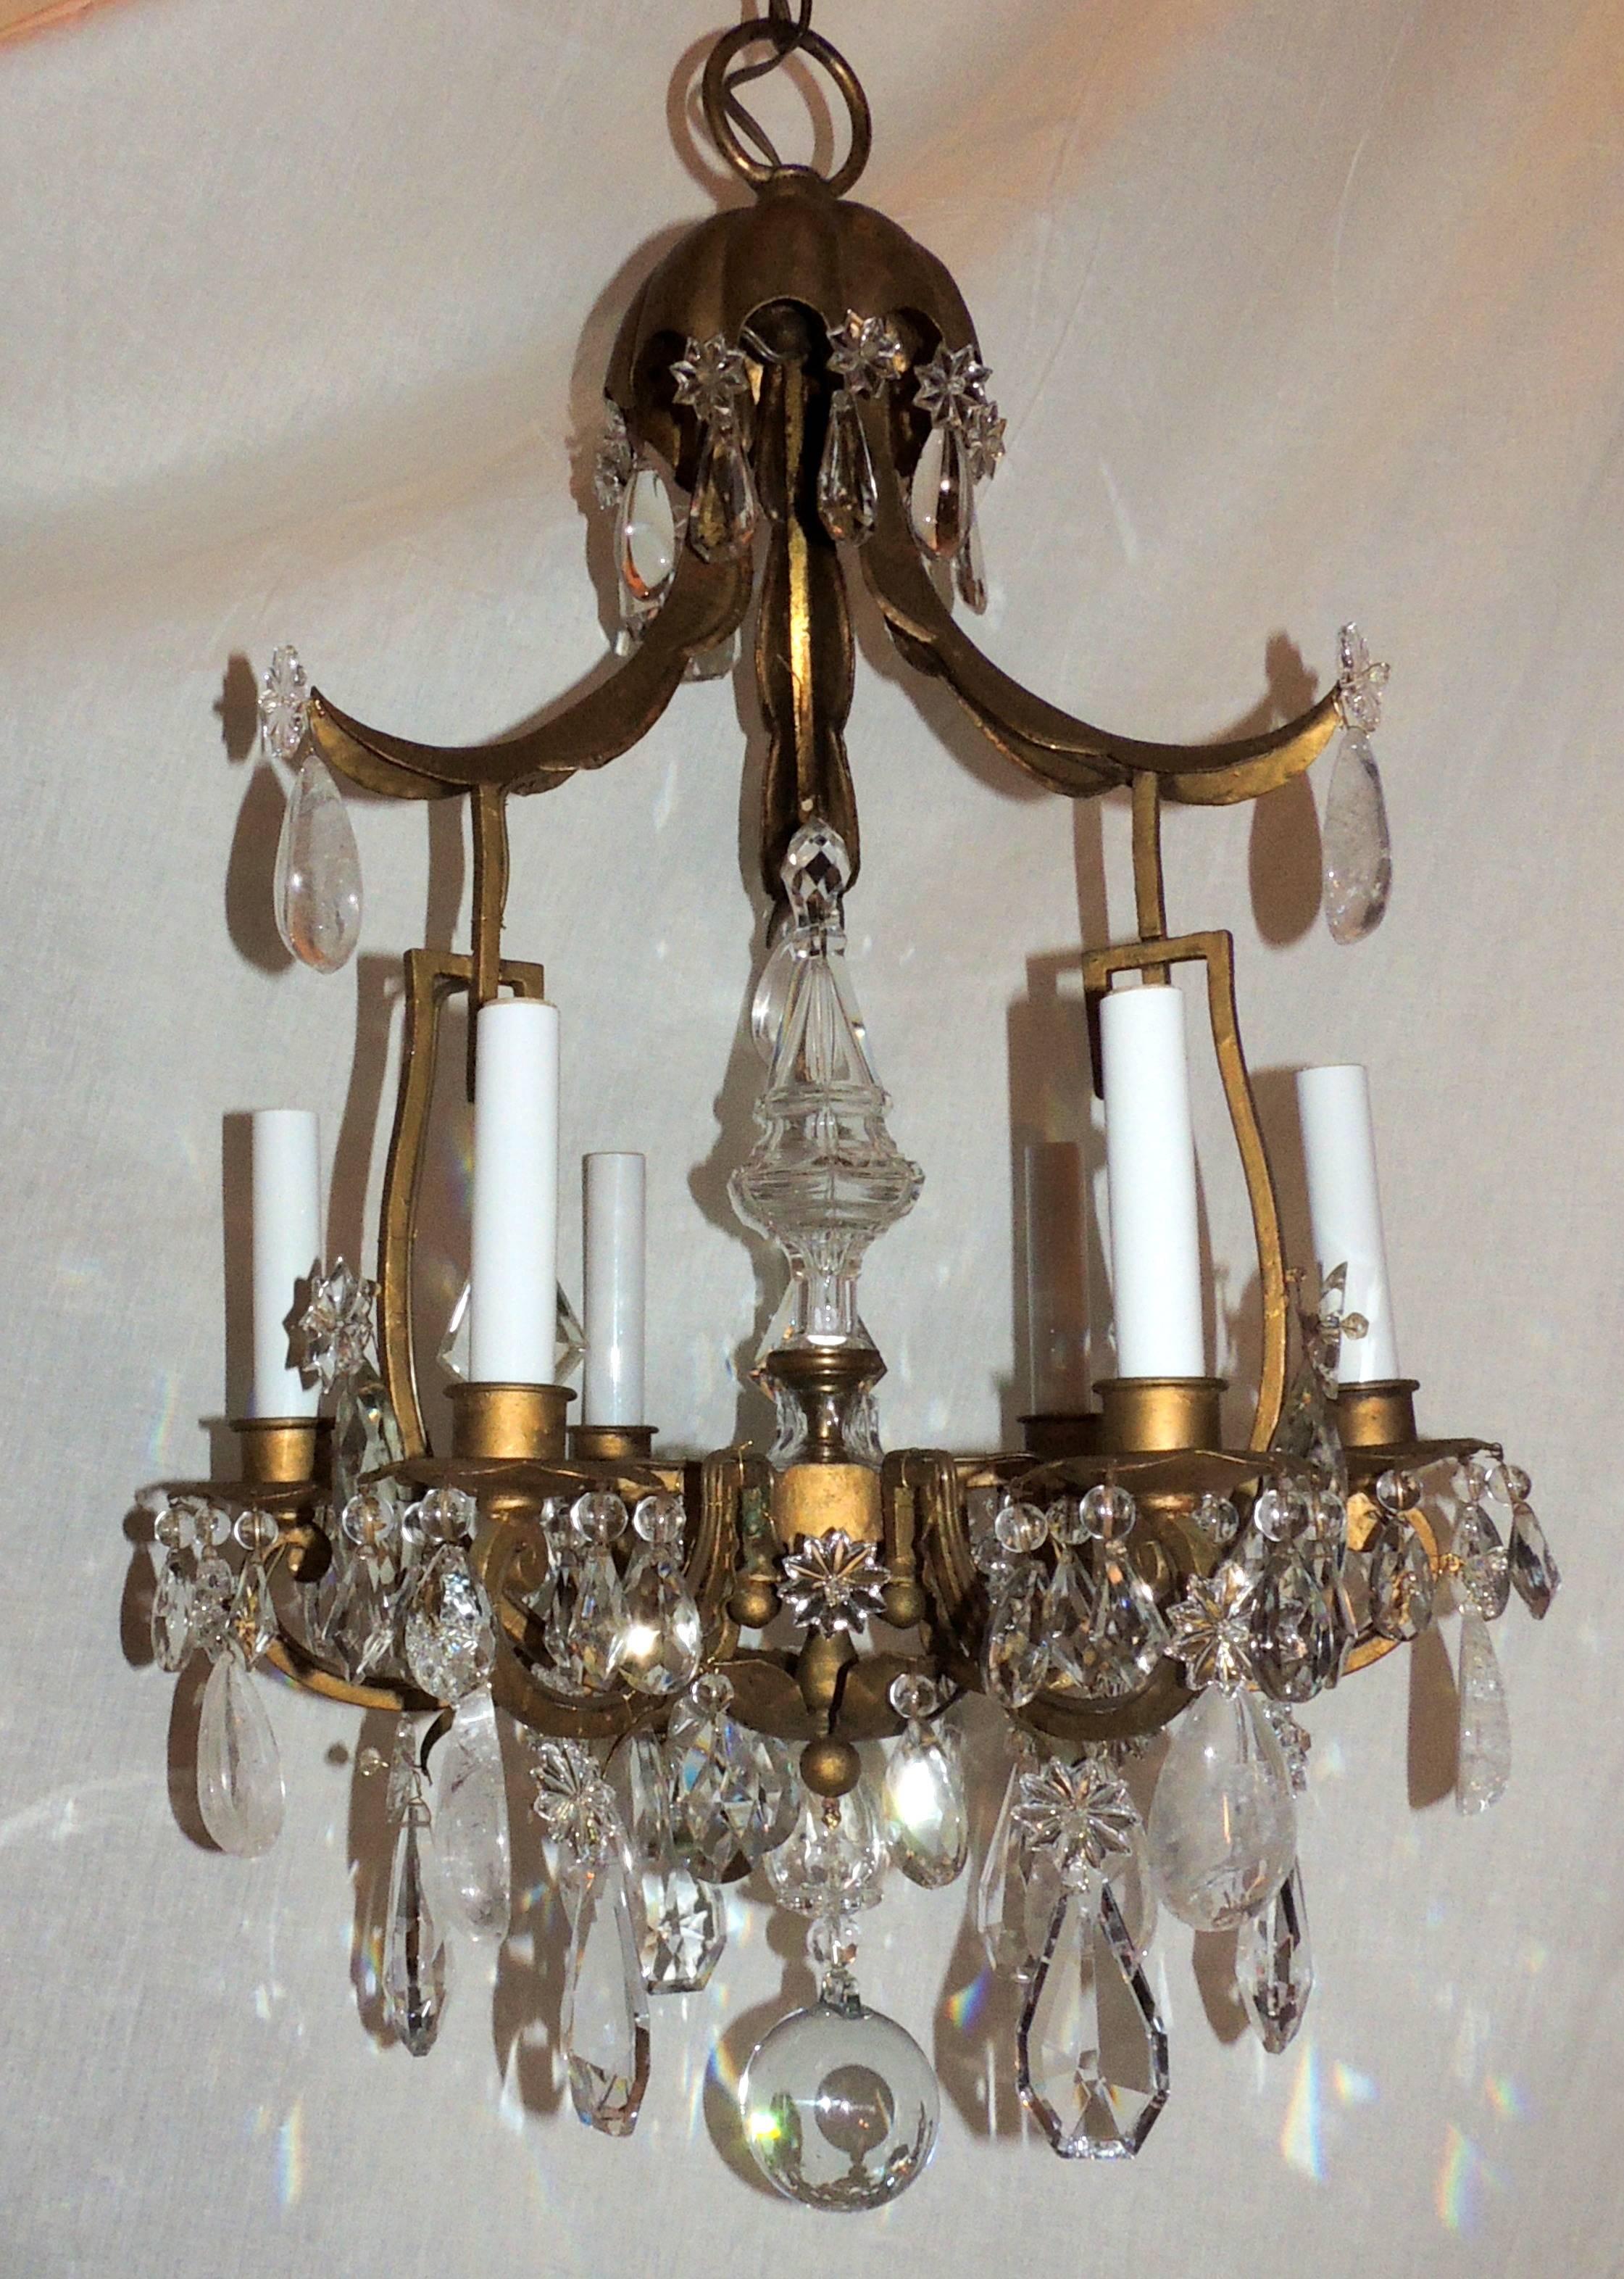 A wonderful French pagoda form gold gilt and rock crystal Baguès style chandelier fitted with six lights each taking a max 60 watts per candelabra socket, newly wired.
Comes with chain and canopy and ready to install and enjoy.
Measures: 29